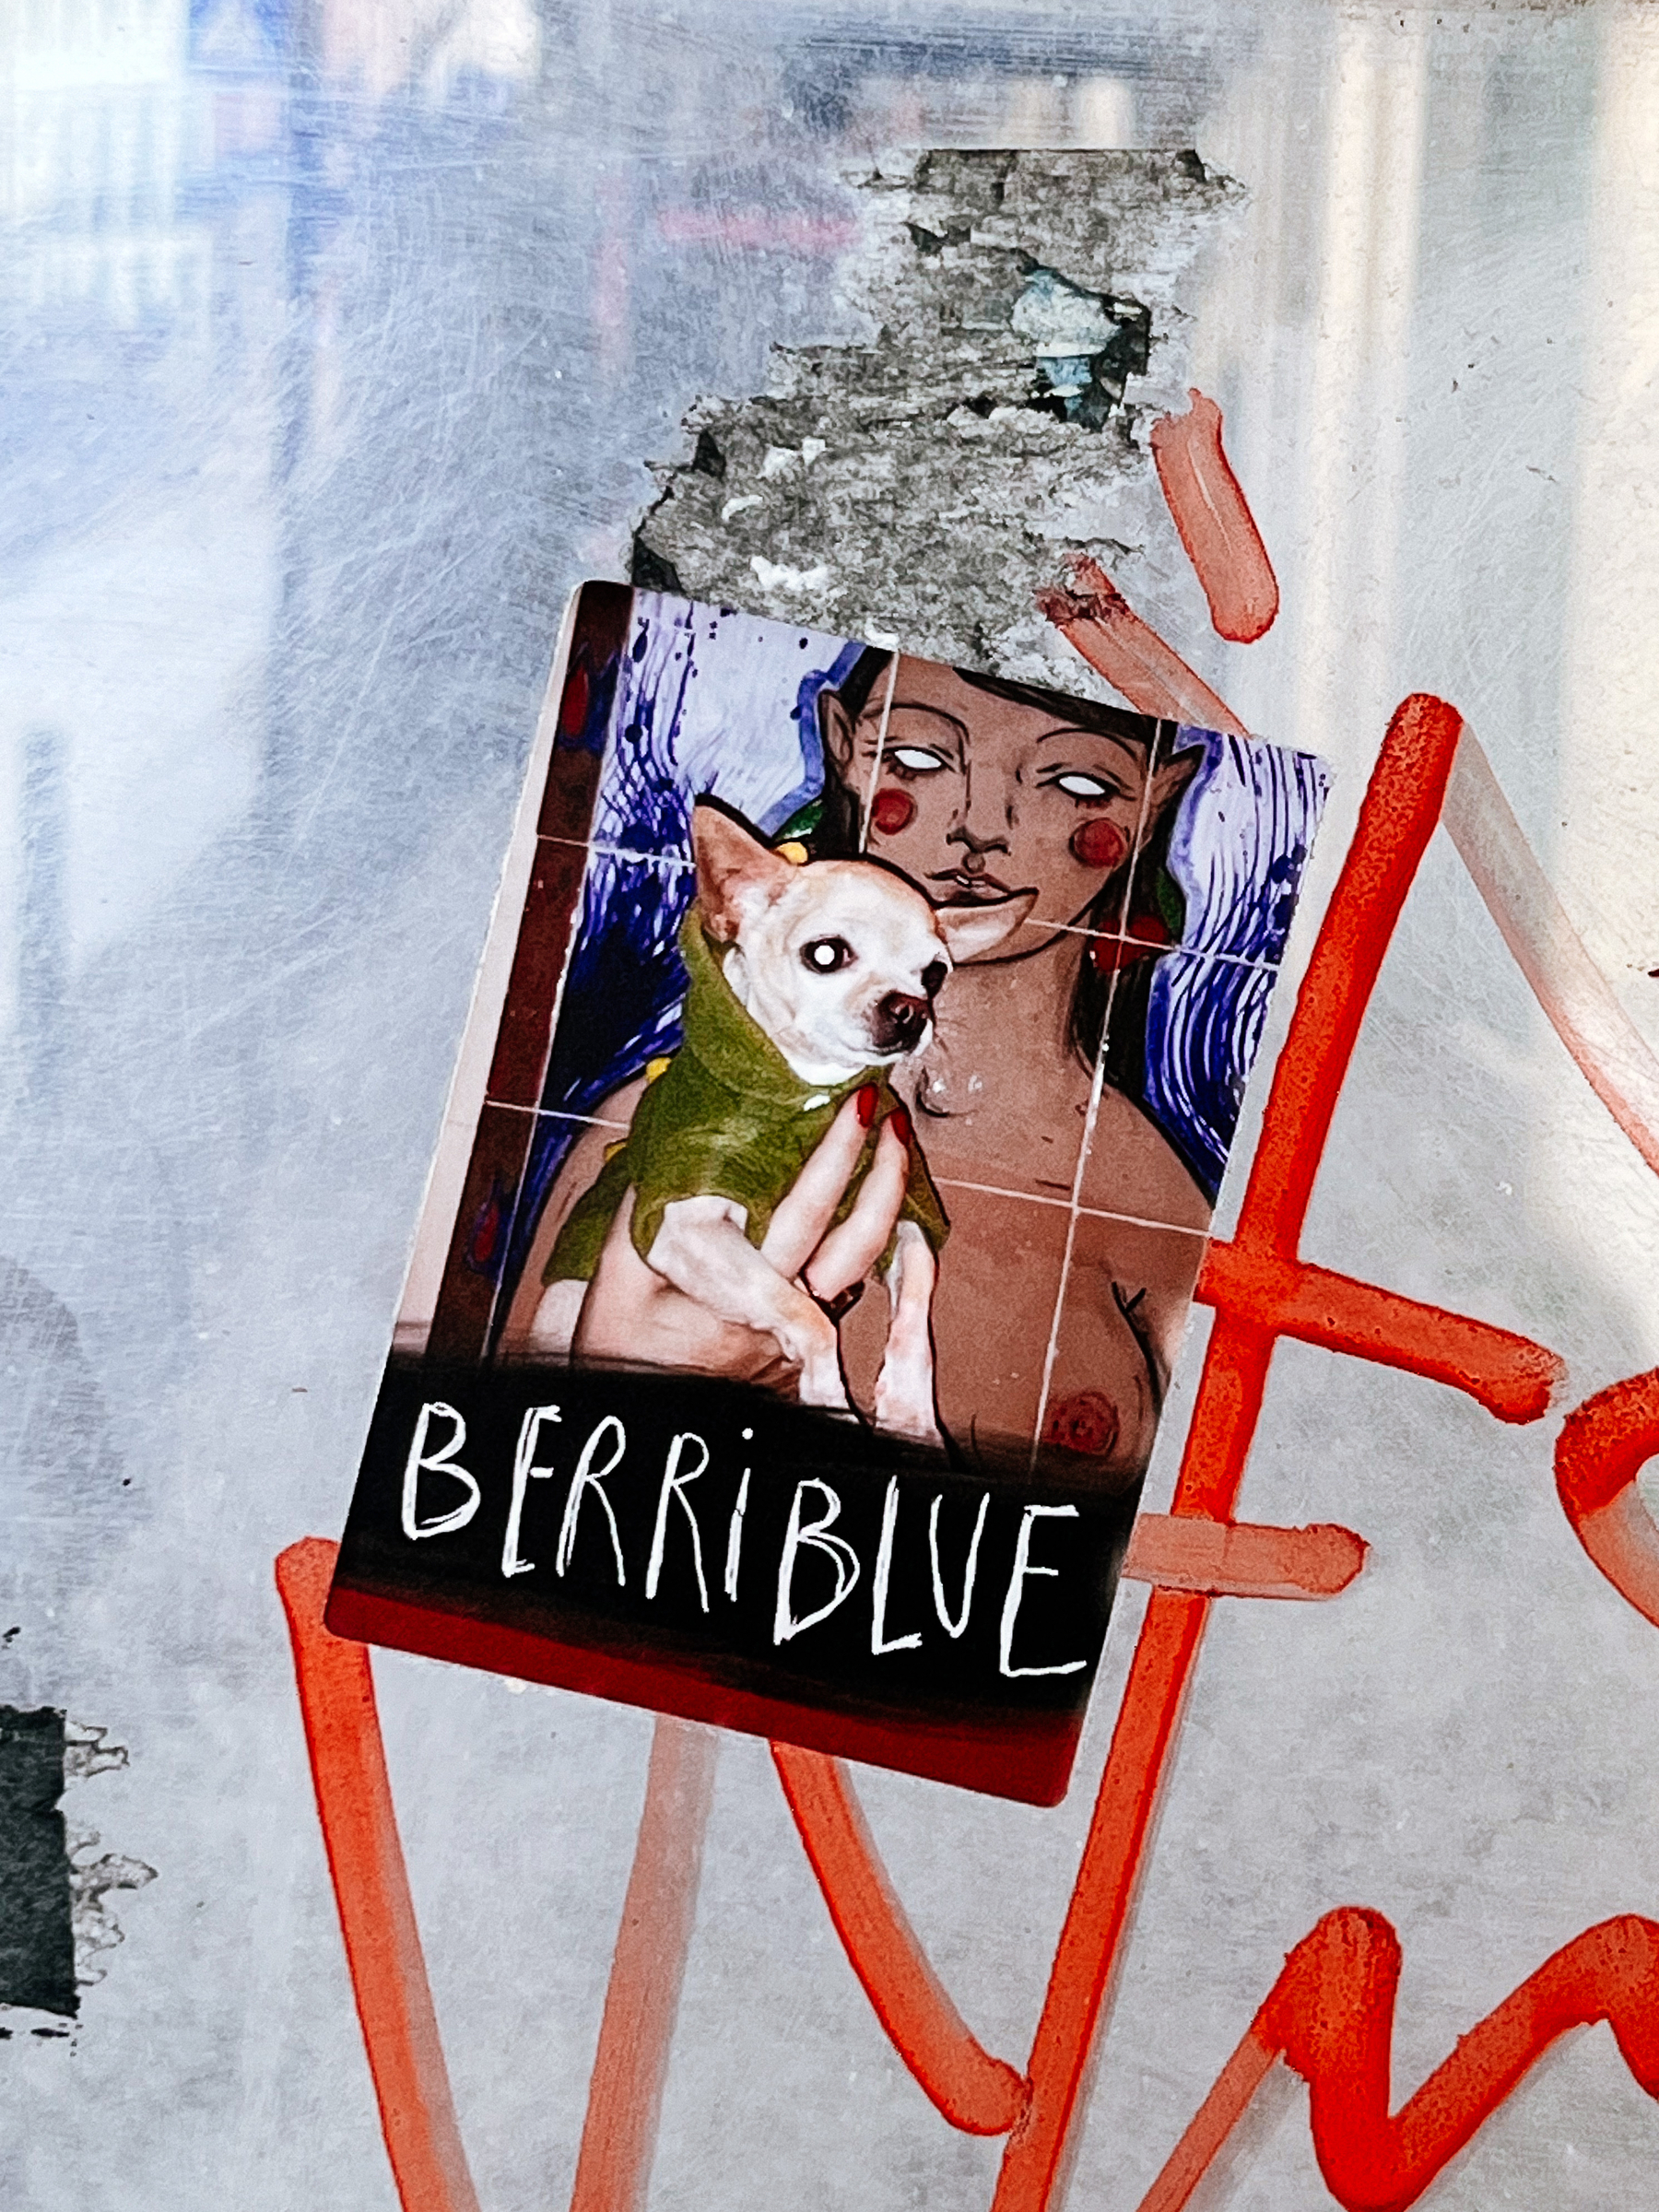 Sticker with “Berriblue” written on the bottom, and a composite. There’s a photo of a chihuahua, being held by a woman. The woman is a drawing though, expect the hand holding the dog. That’s real.